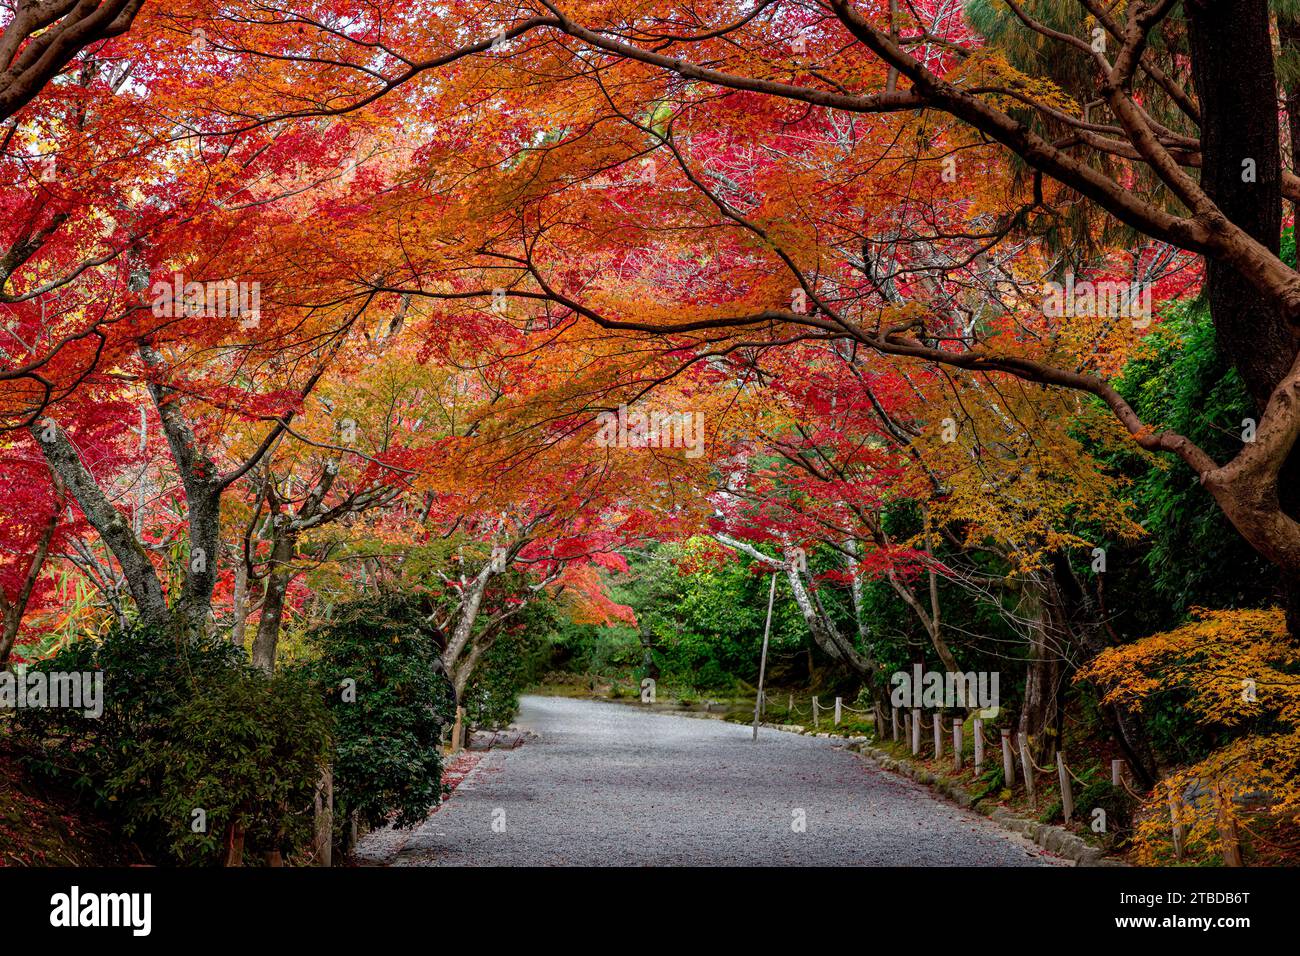 foliage in japan with red and yellow maples Stock Photo